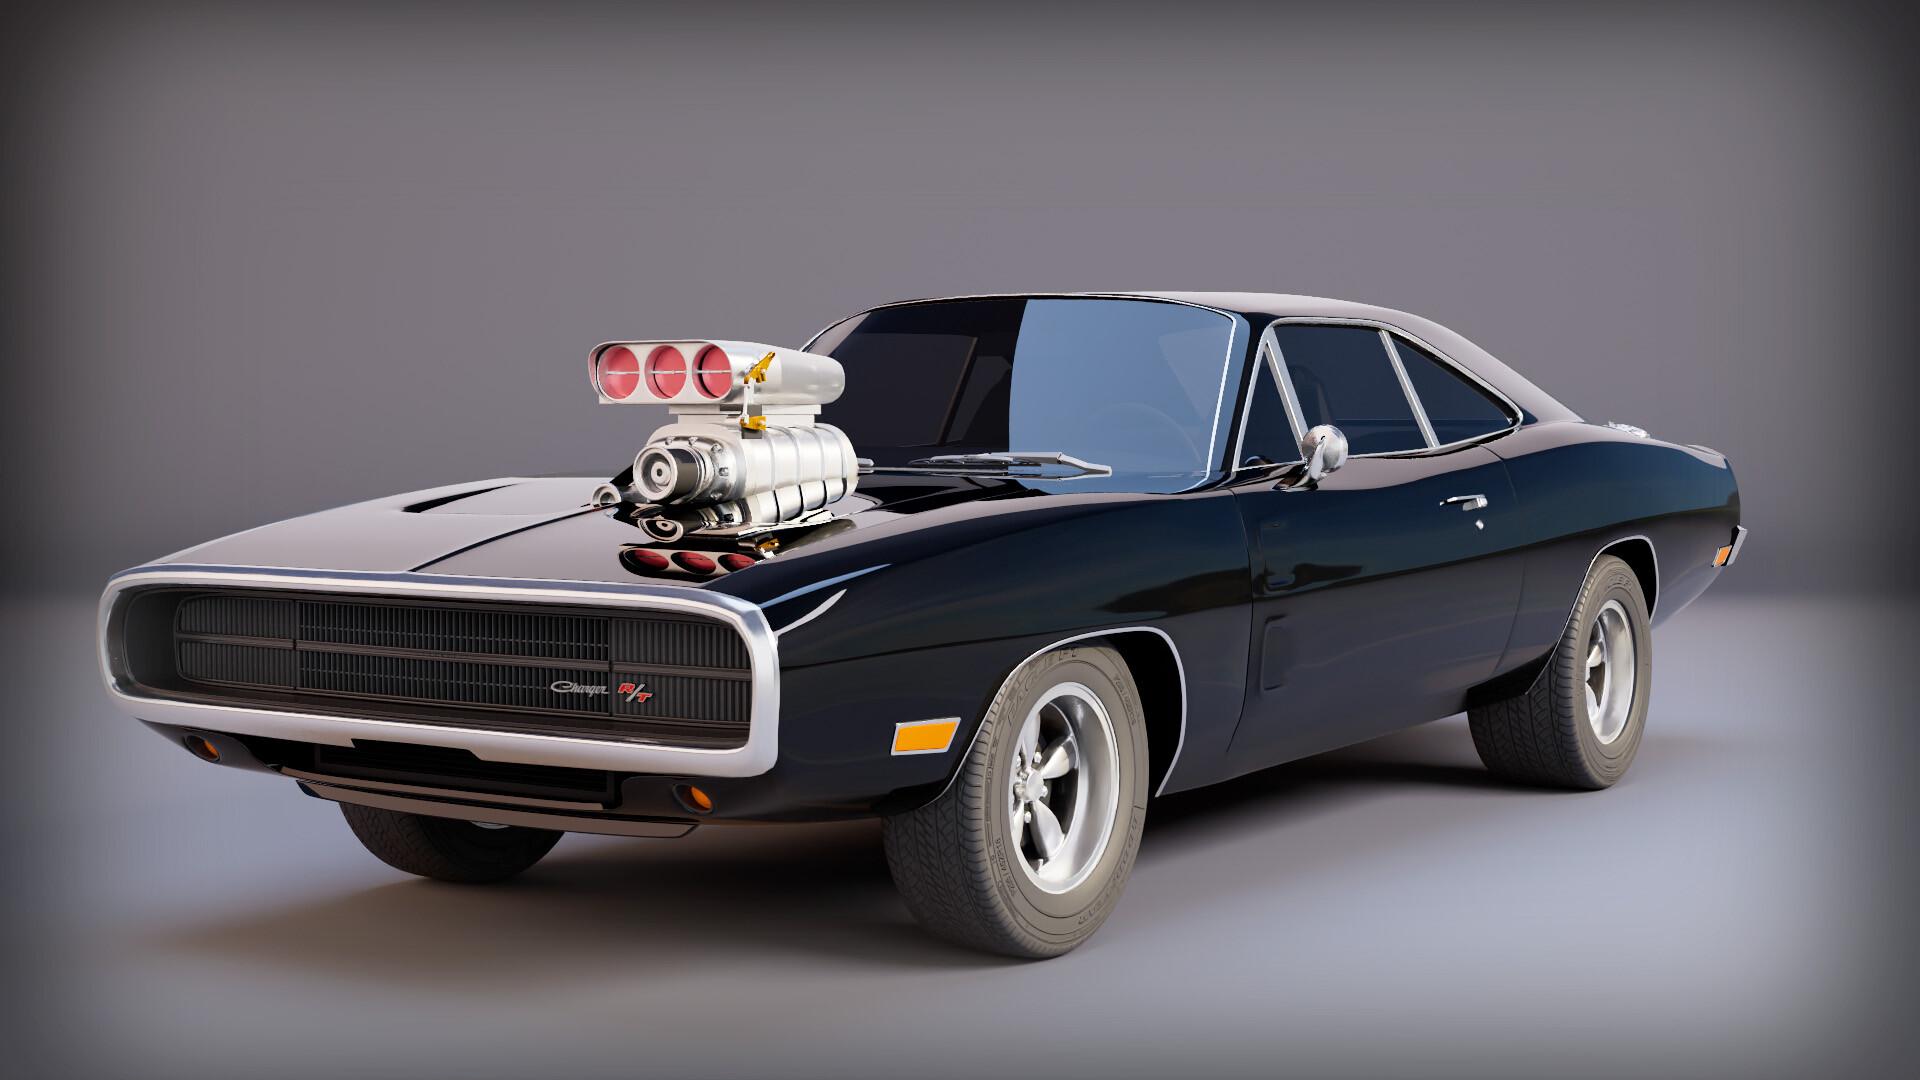 File:Dodge Charger - The Fast and the Furious.JPG - Wikipedia